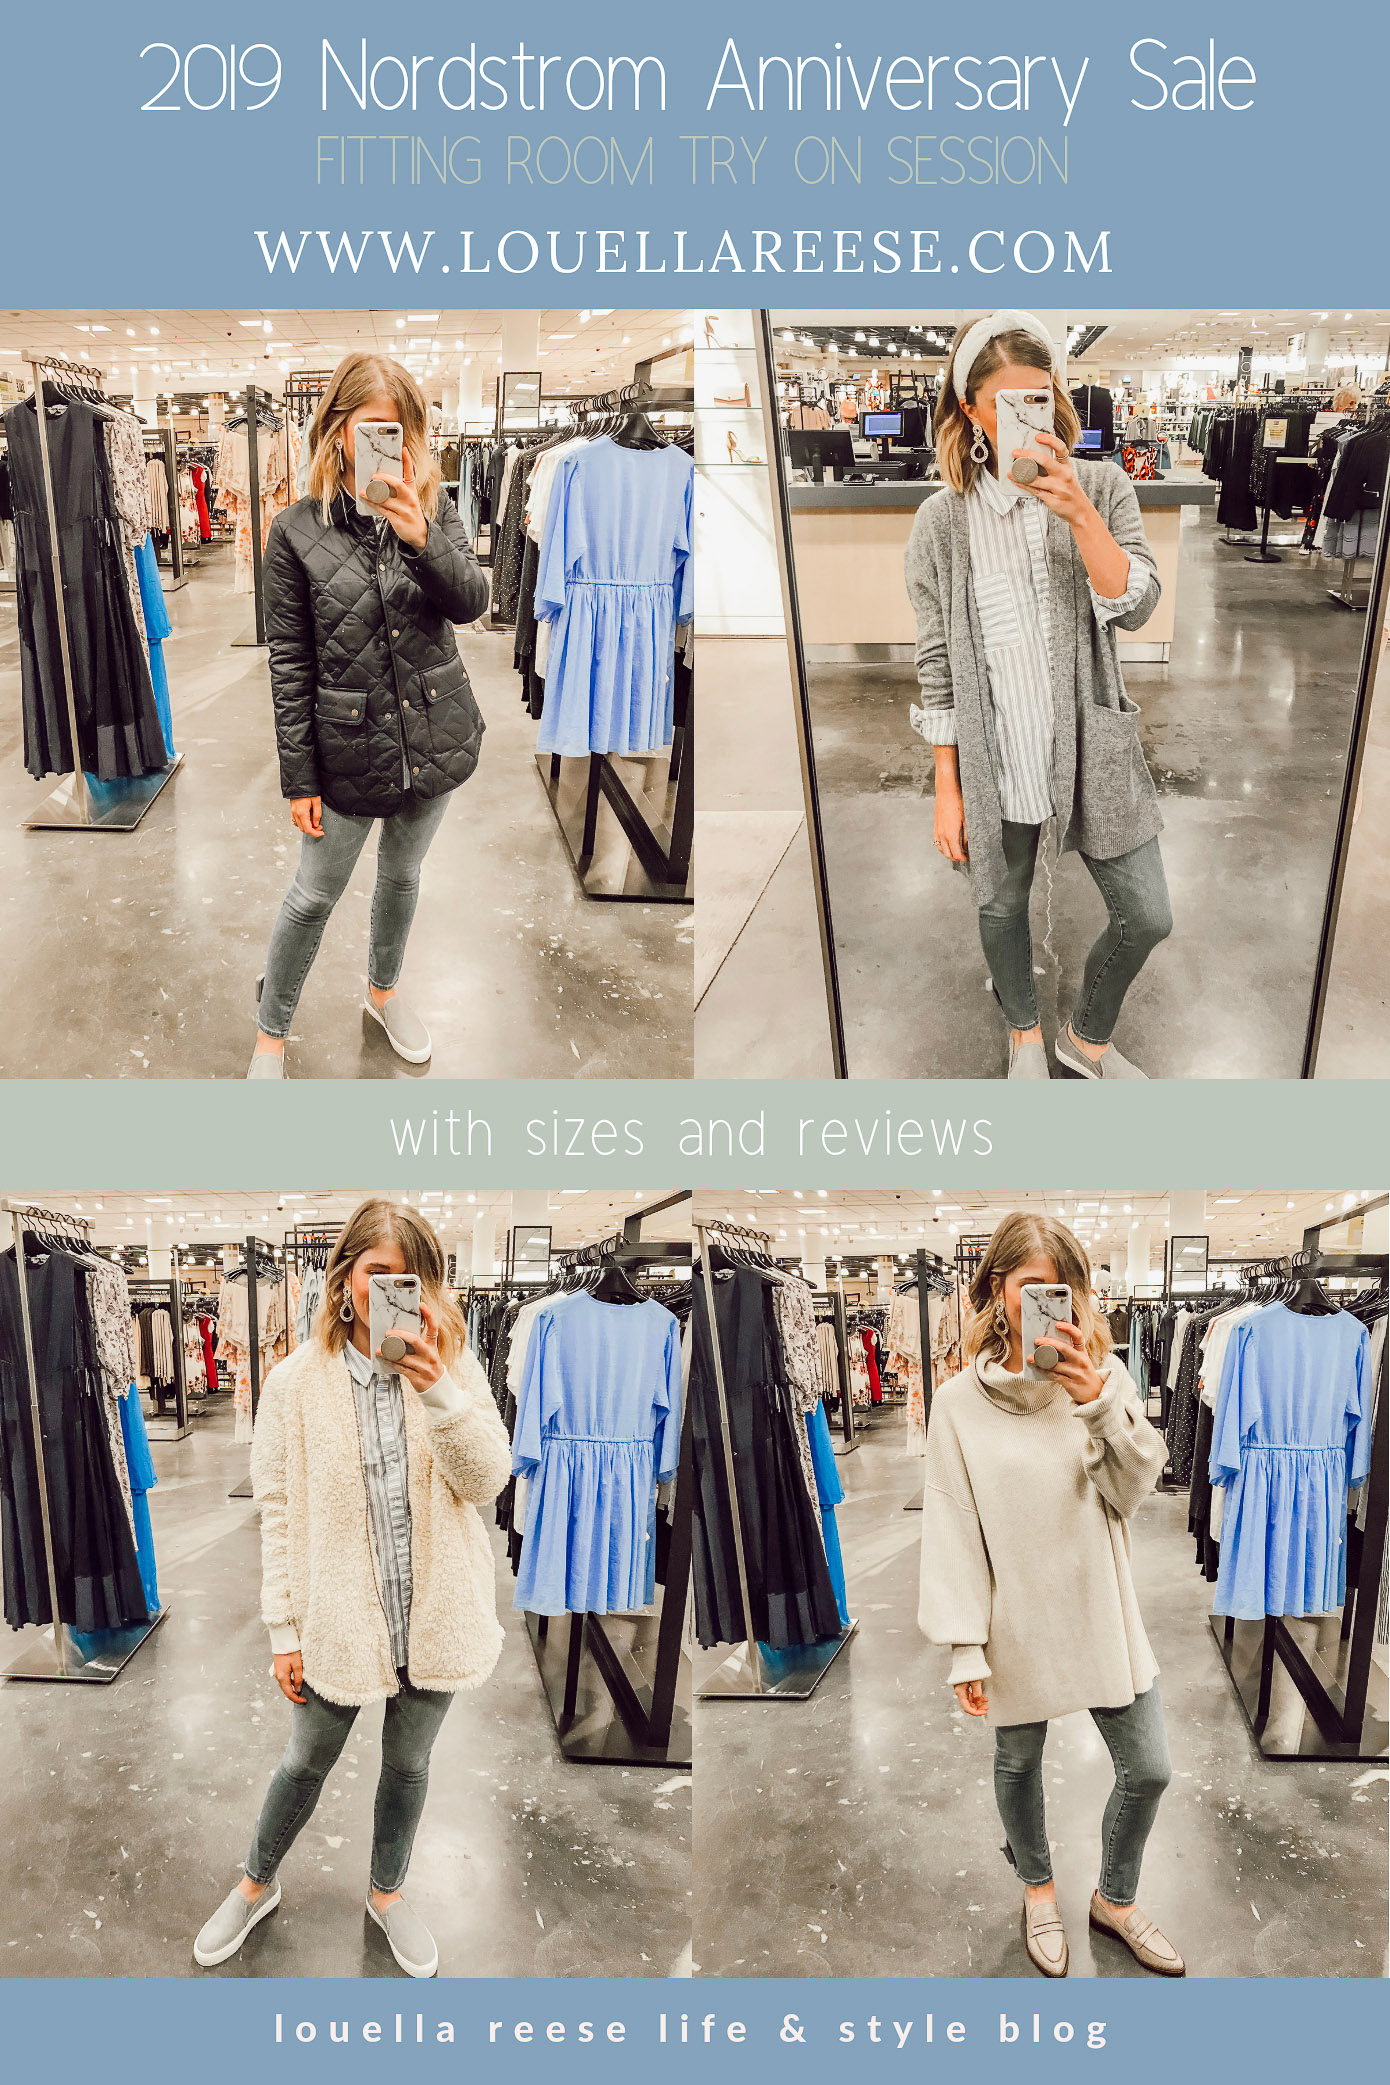 2019 Nordstrom Anniversary Fitting Room Session featured on Louella Reese Life & Style Blog